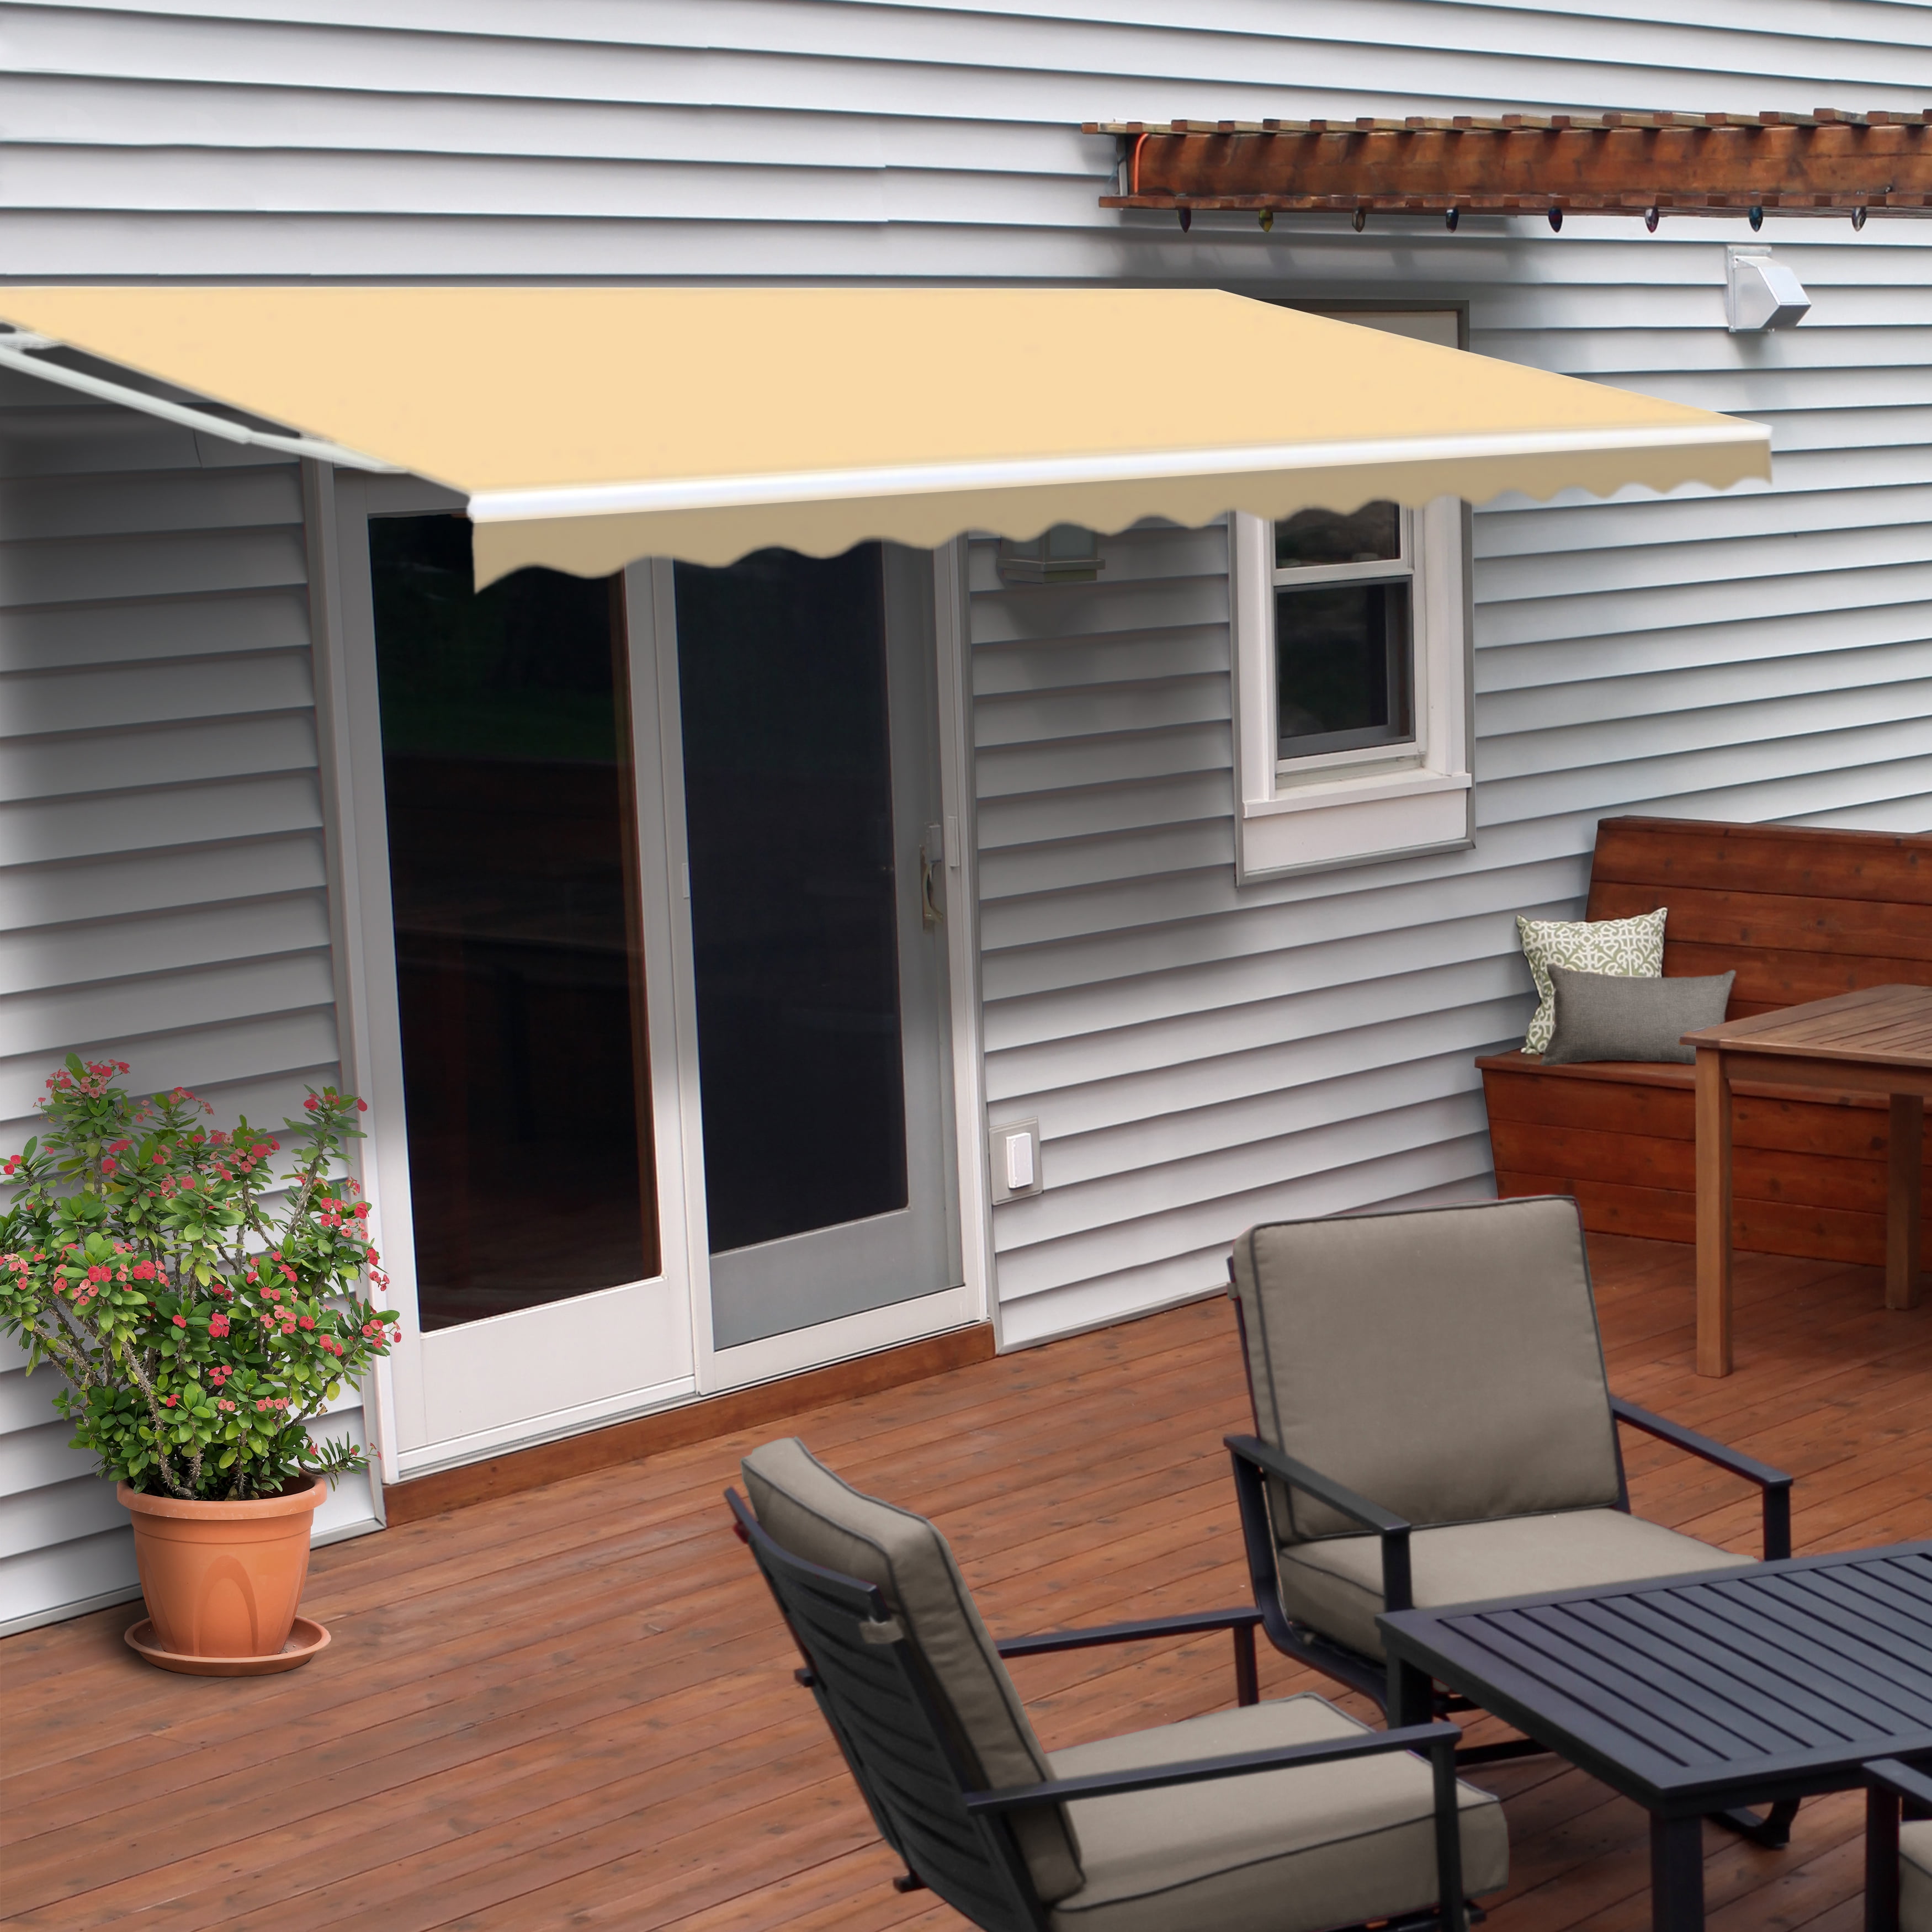 ALEKO Fabric Replacement For 20x10 Ft Retractable Awning Black Color 